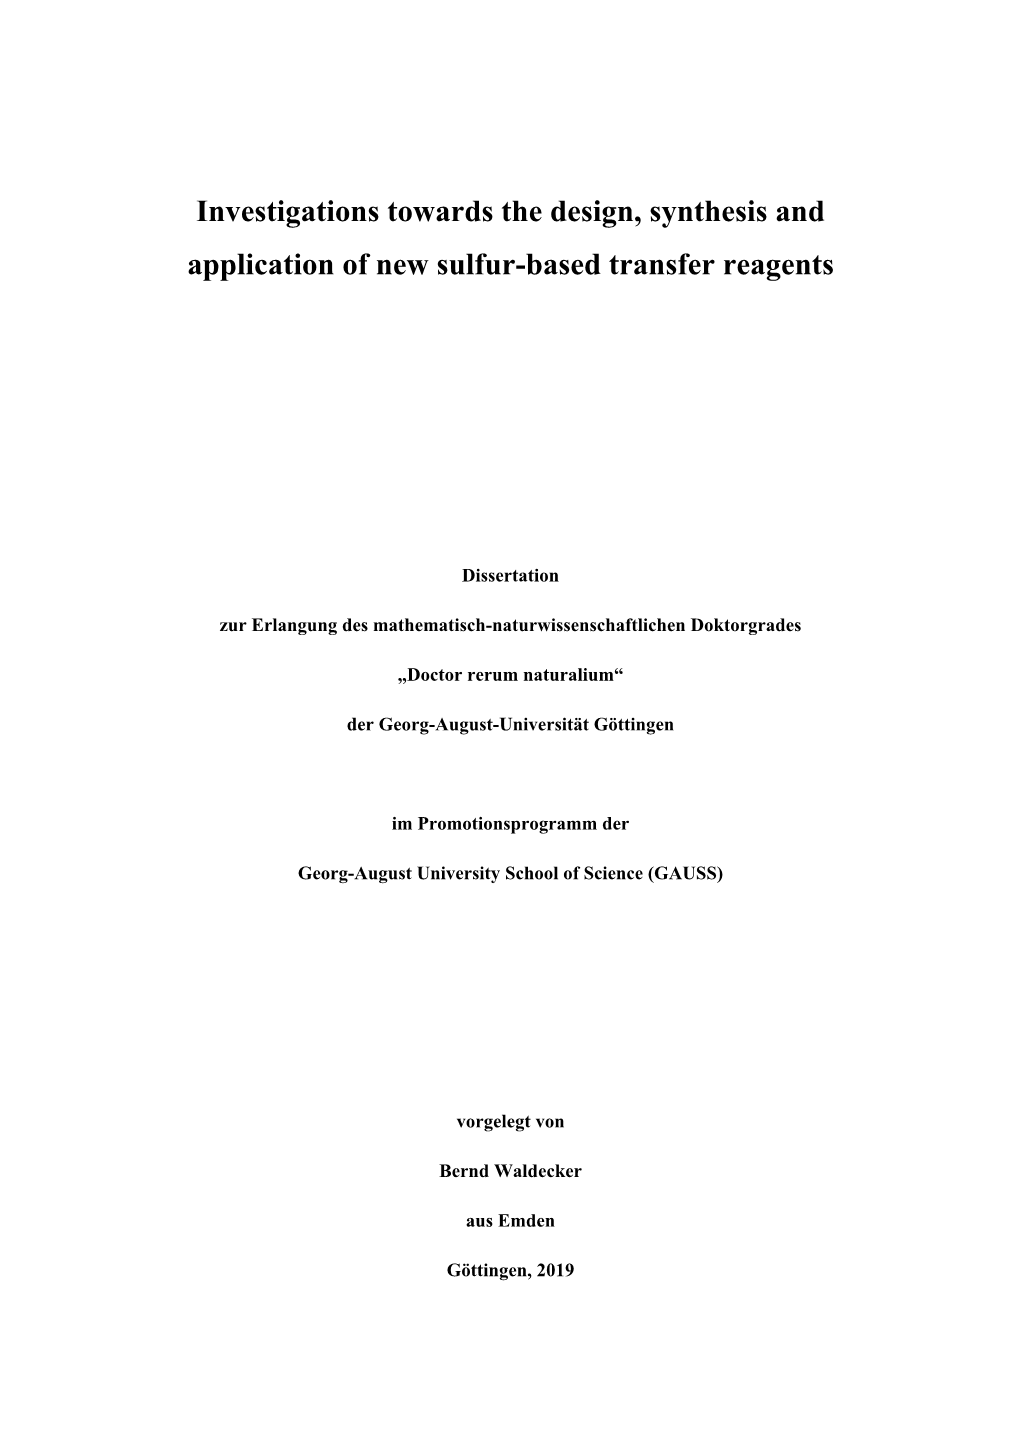 Investigations Towards the Design, Synthesis and Application of New Sulfur-Based Transfer Reagents